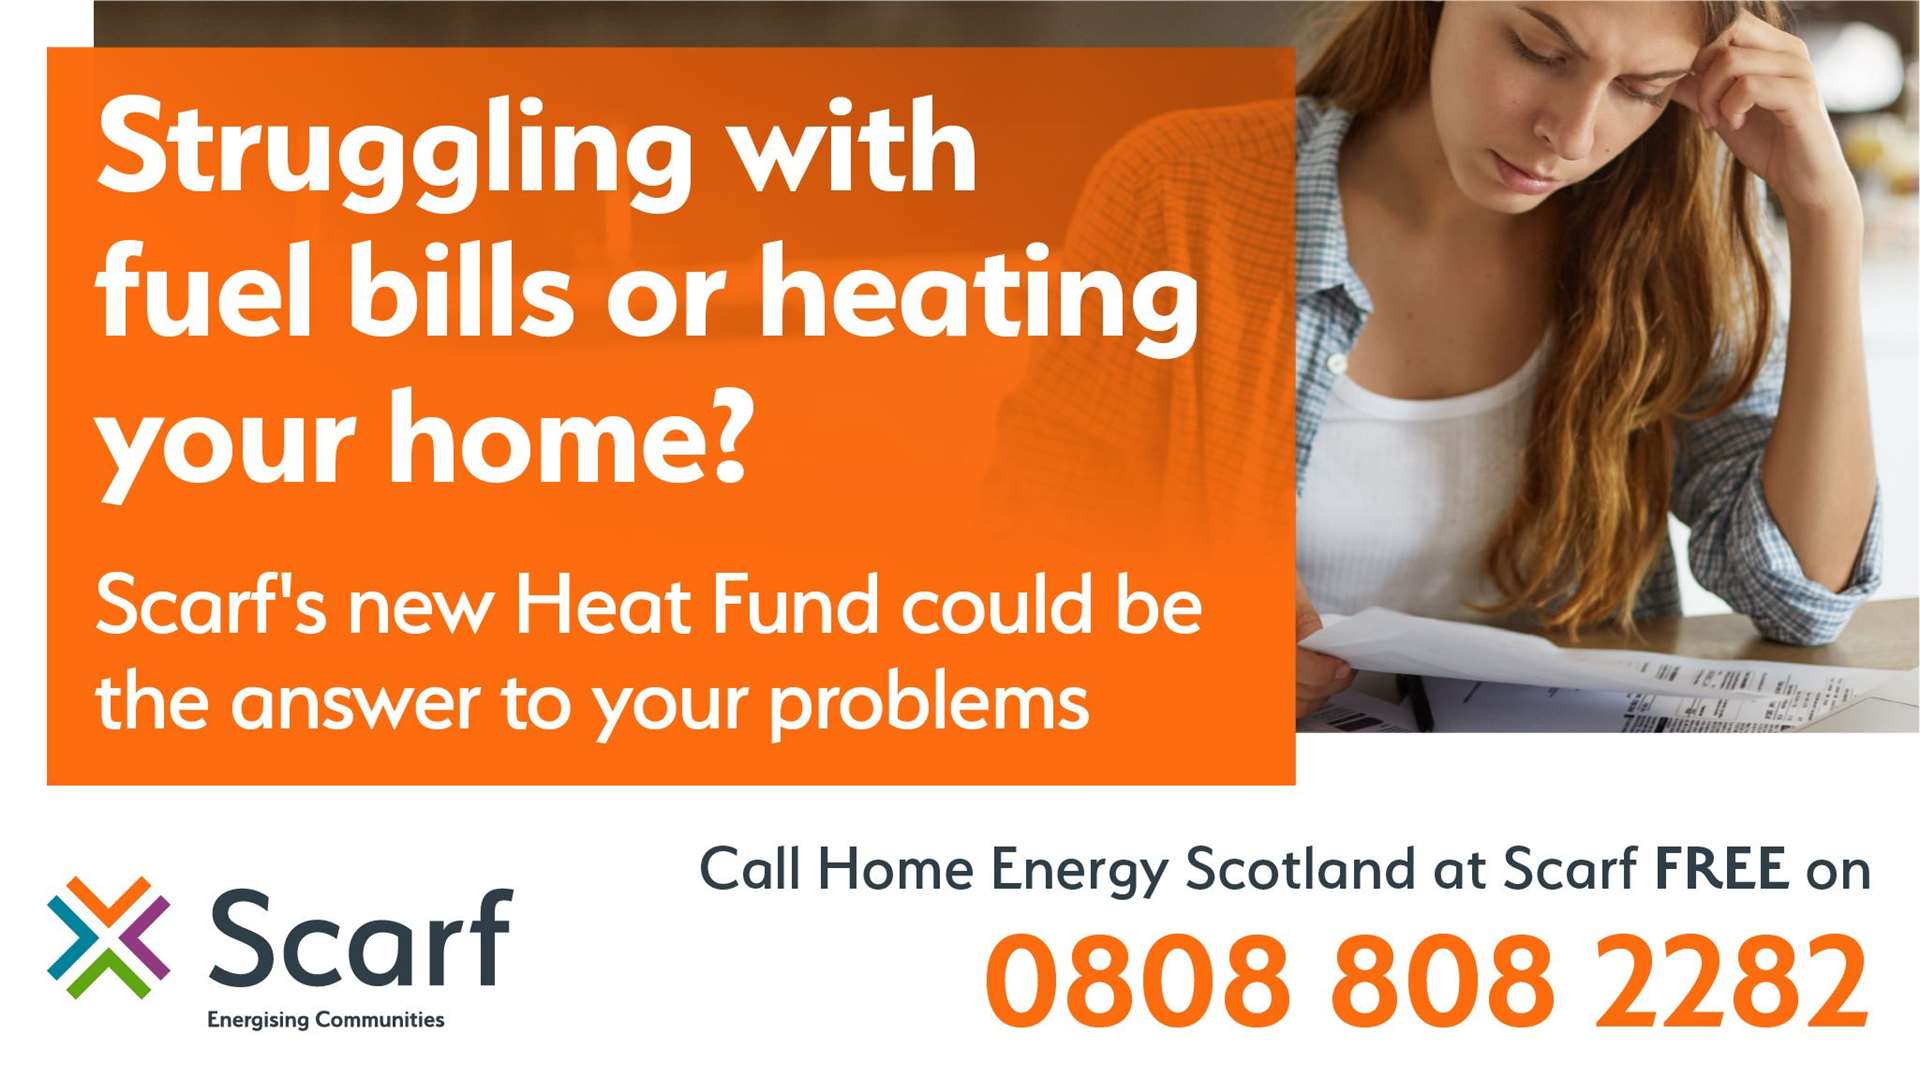 Scarf's Heat Fund could provide much needed help to those struggling to pay fuel bills.